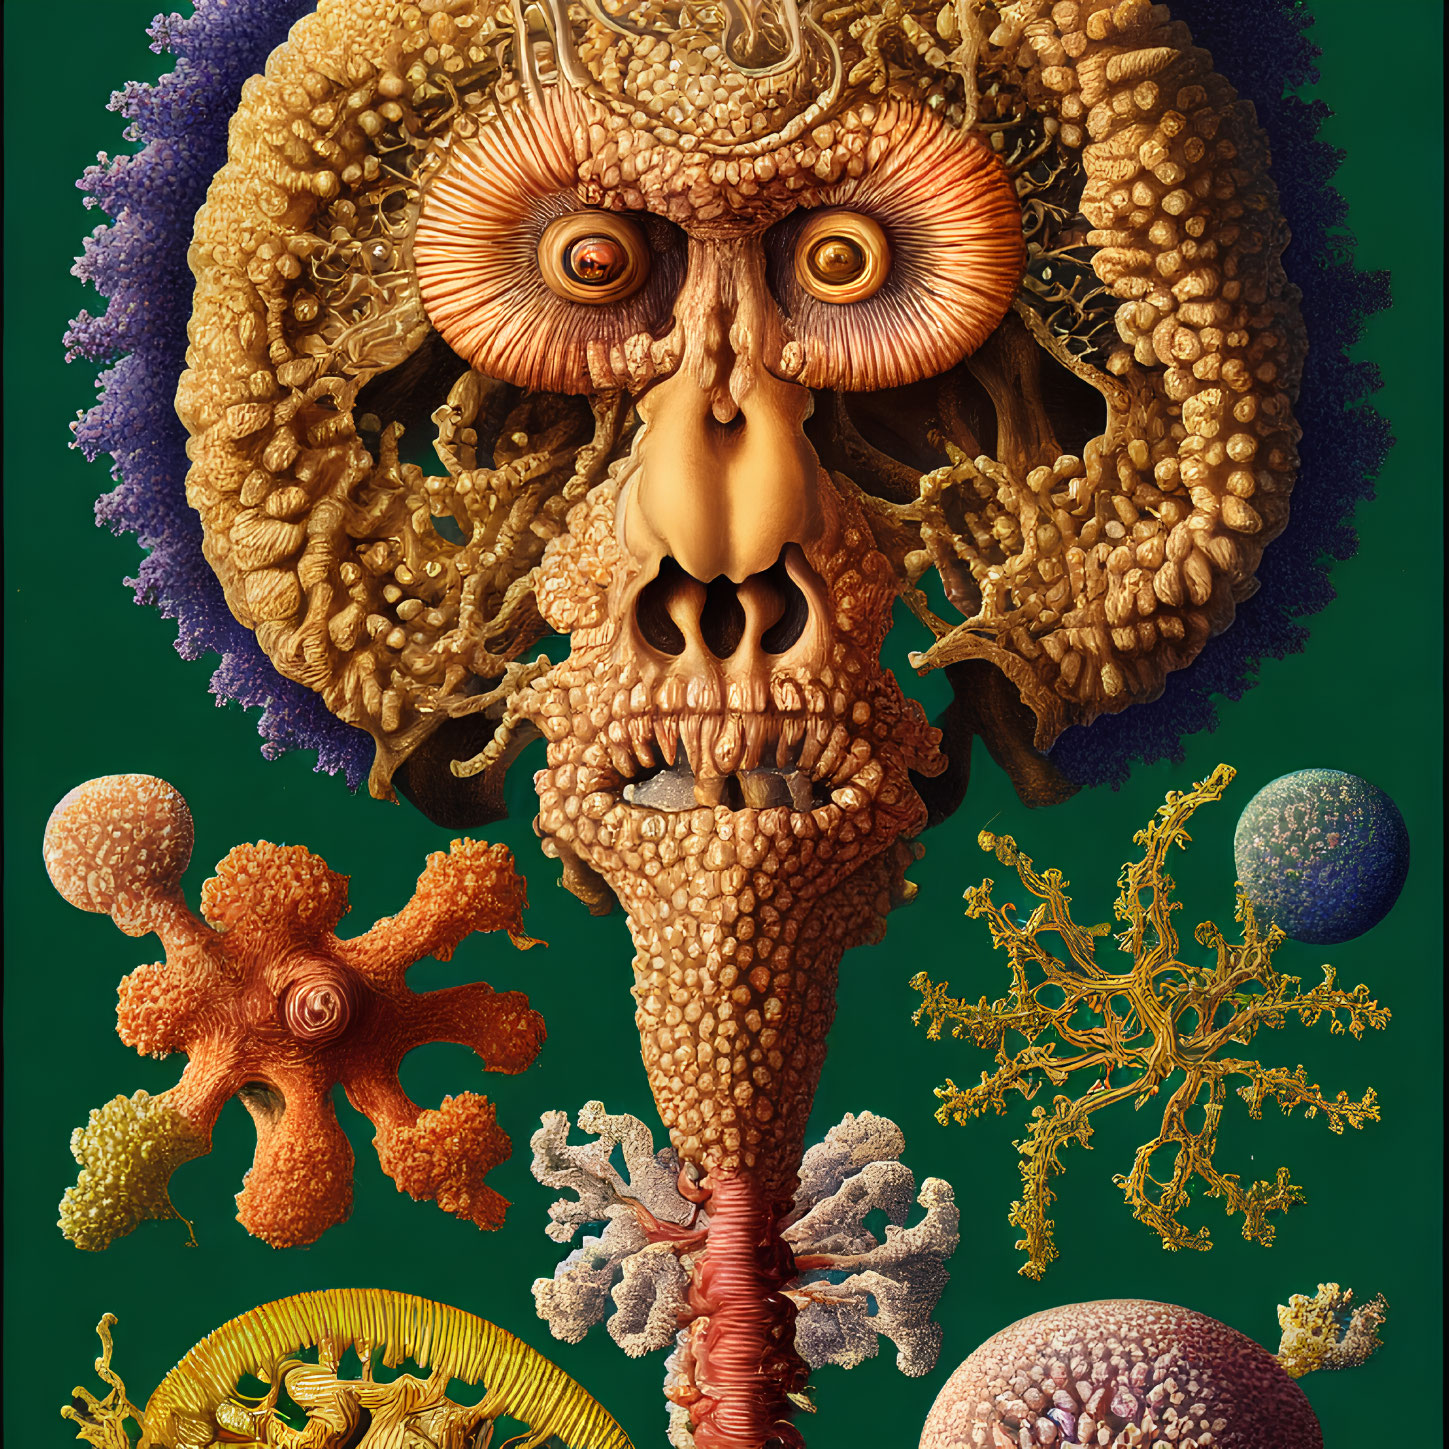 Surreal coral face illustration with marine and fantasy elements